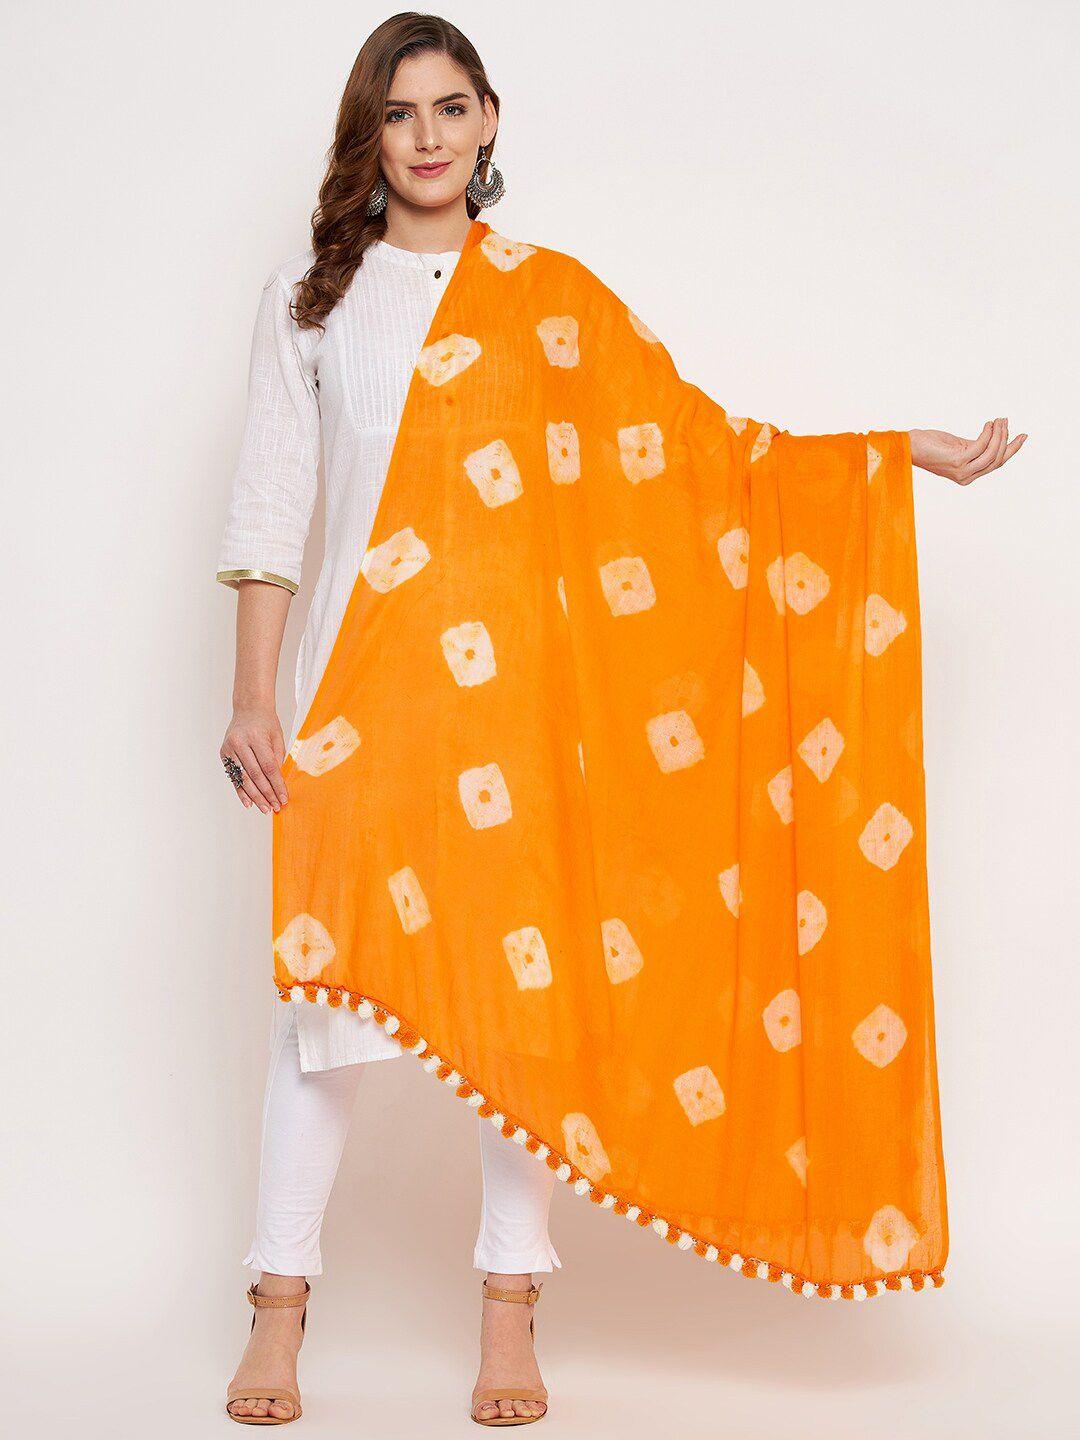 clora creation yellow & white printed pure cotton tie and dye dupatta